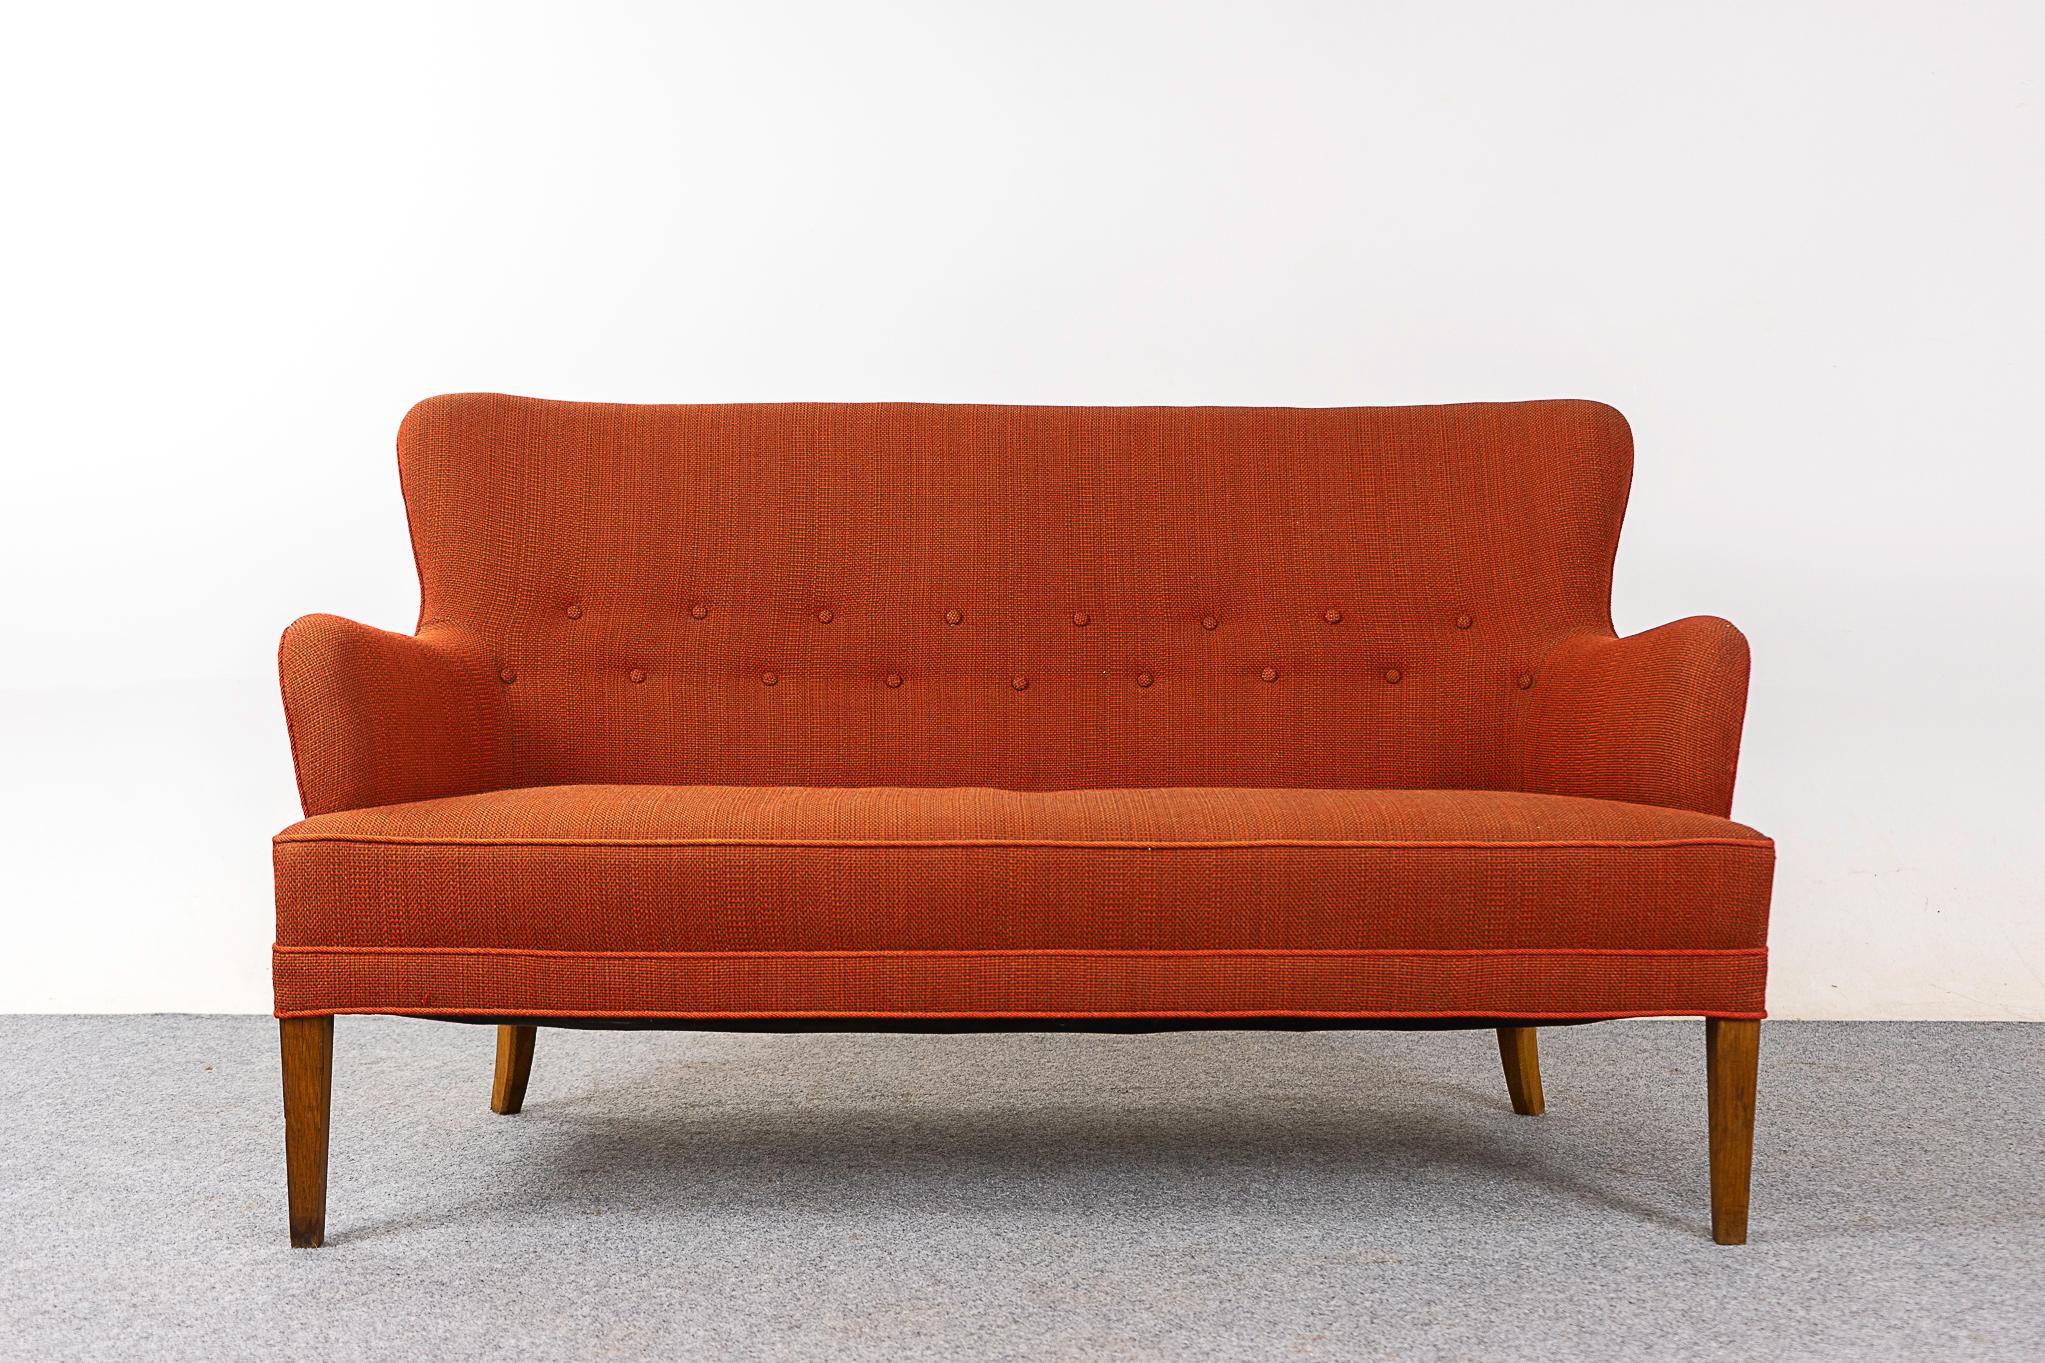 Danish modern loveseat, circa 1960s. Charming original burnt orange upholstery with tufted back rest. Compact footprint, a perfect seating solution for urban dwellers in cozy lofts or condos. Tapered solid wood legs, upholstery is as-is.

Please